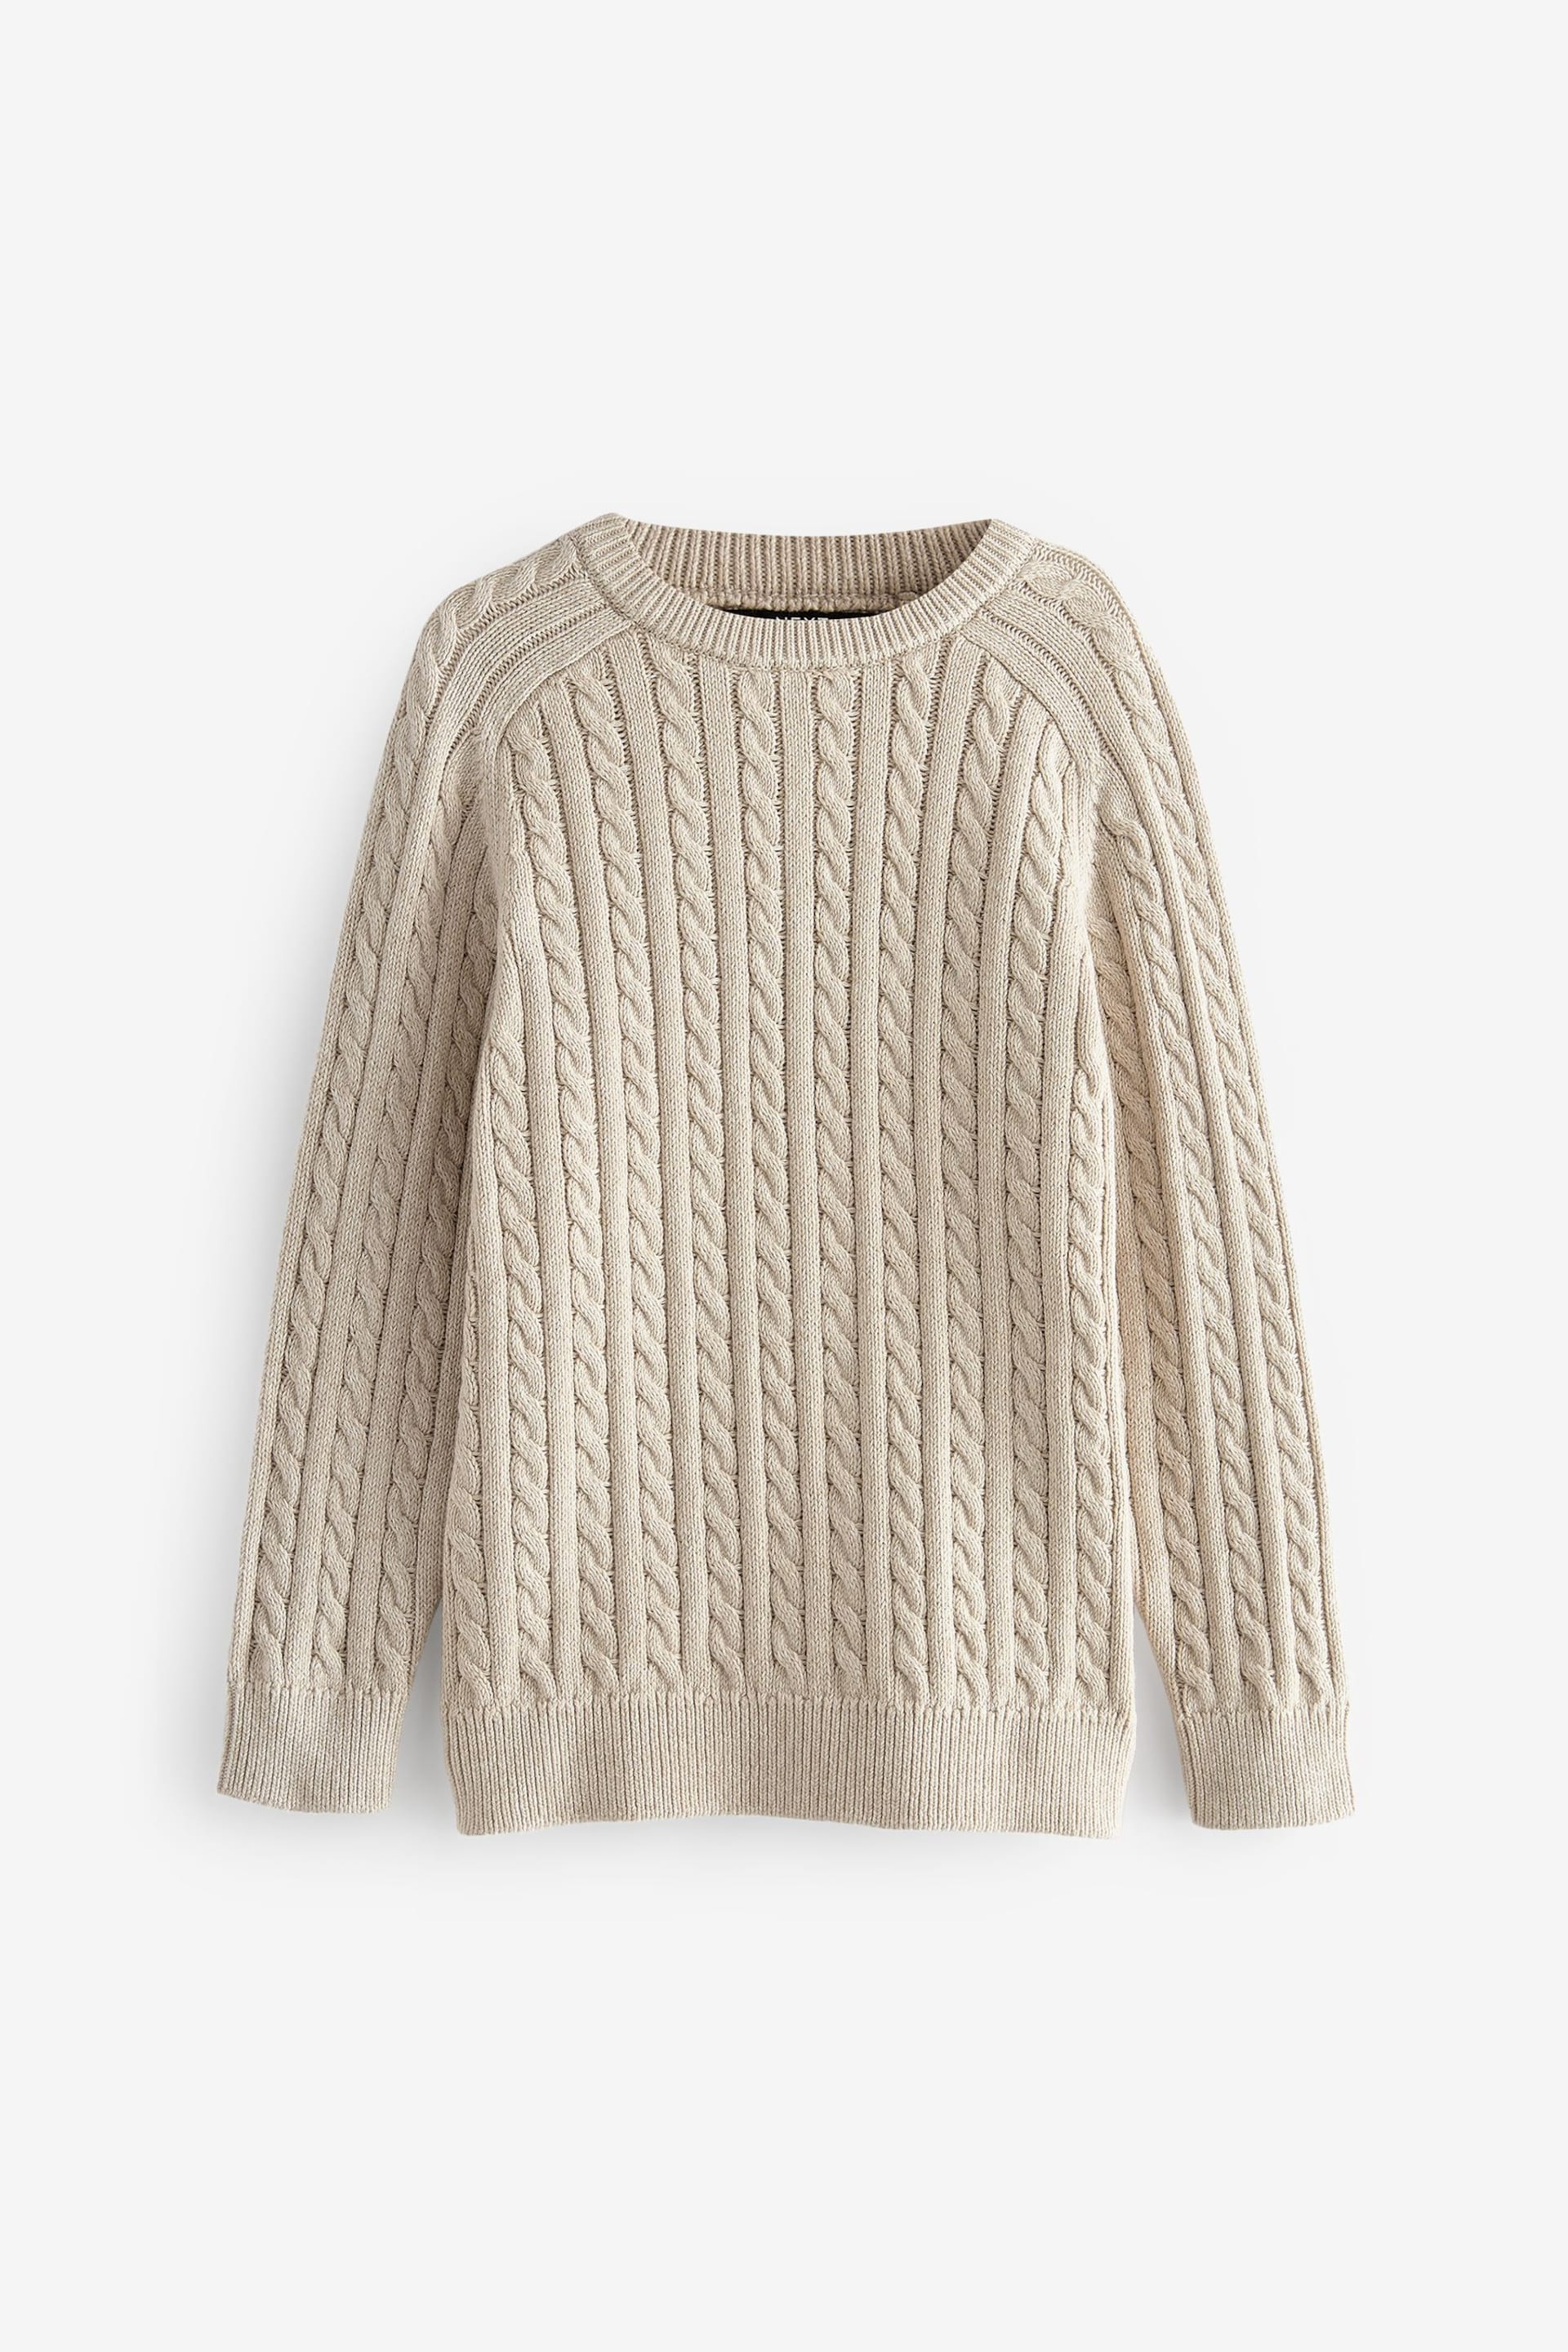 Neutral Beige Cable Knit Crew Jumper (3-16yrs) - Image 6 of 7